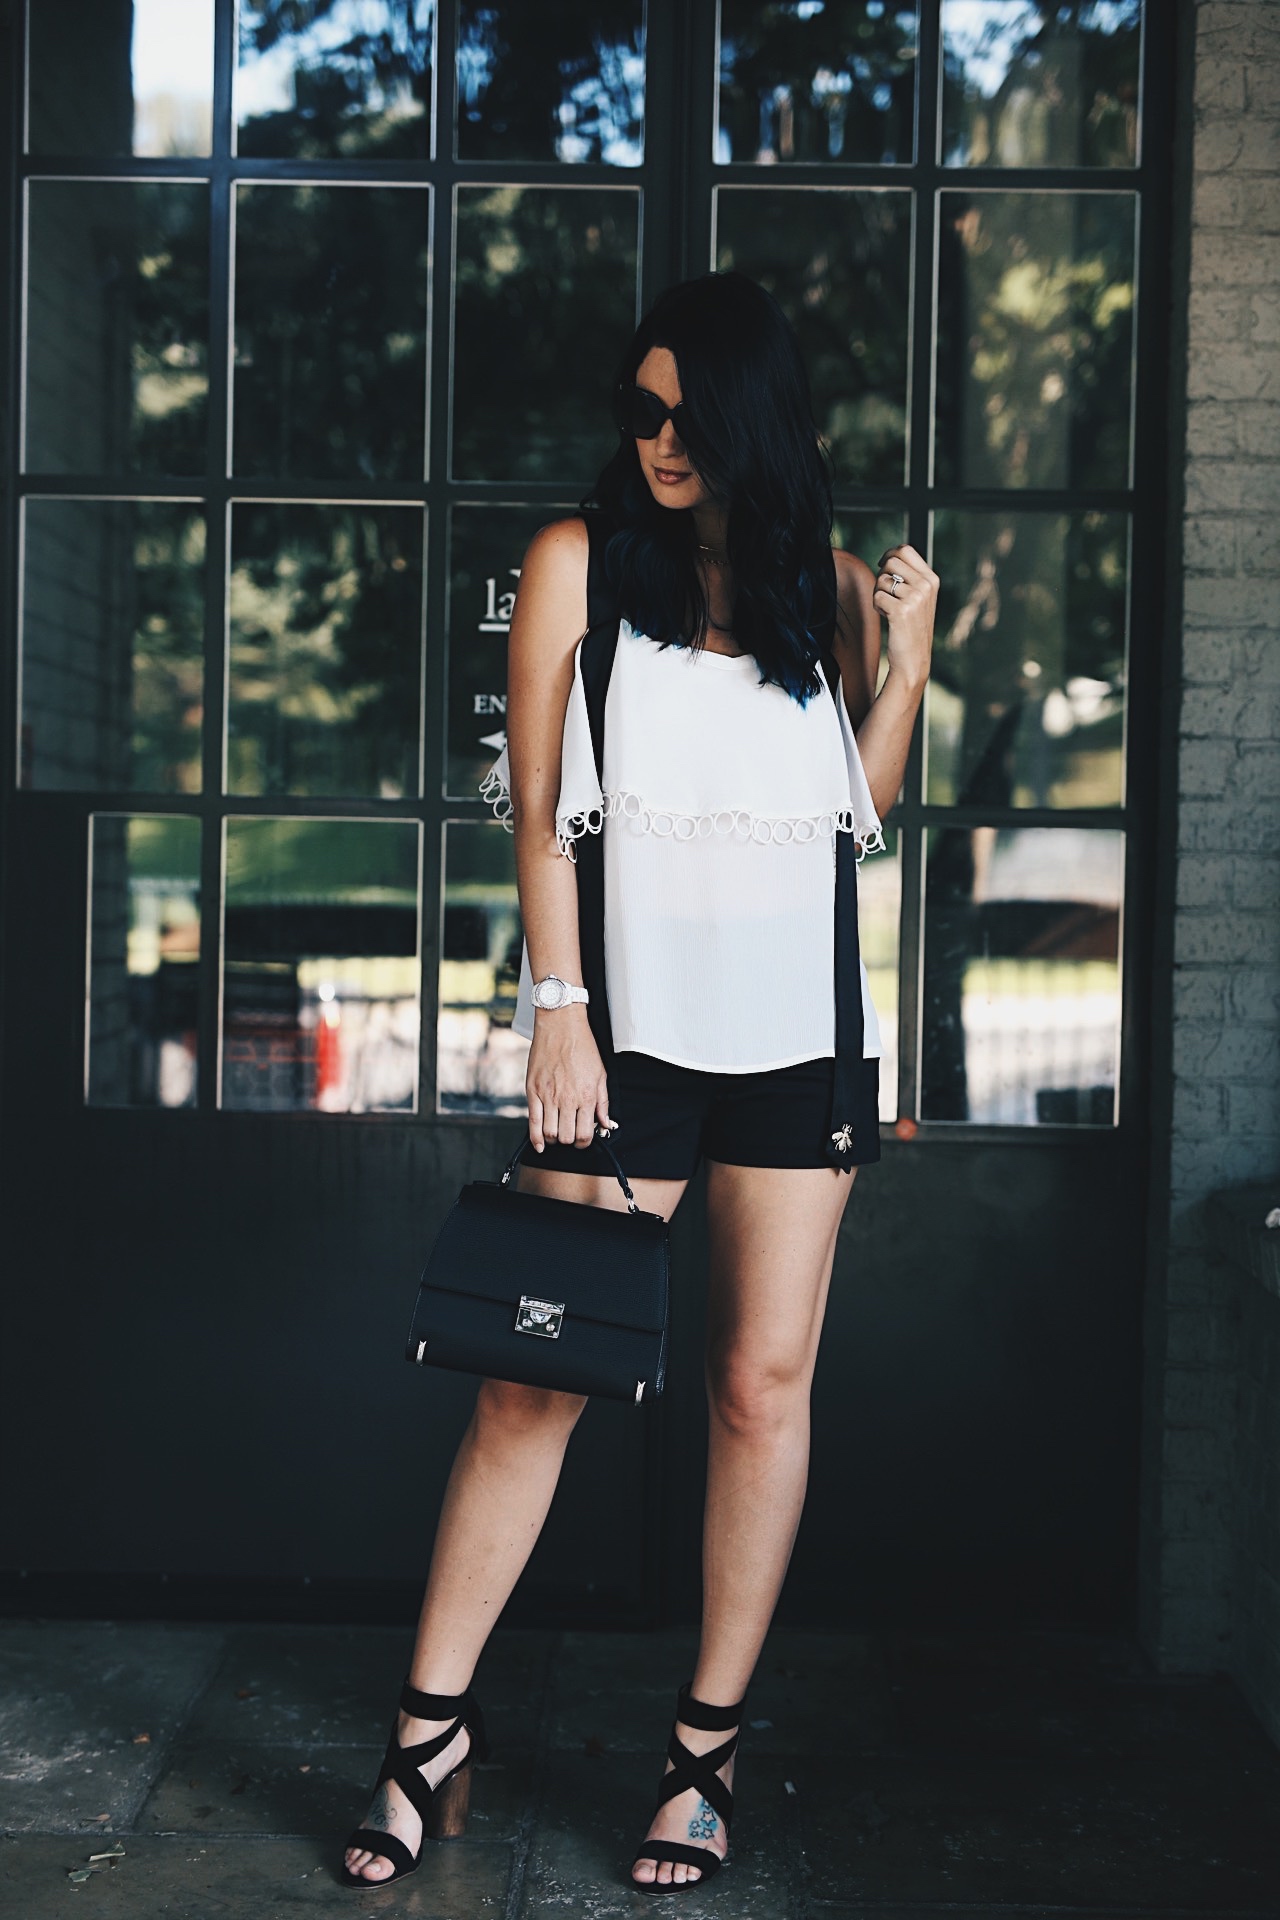 DTKAustin shares her love for black and white with this bee detailed top from Chicwish. Shoes from Splendid, Shorts from Alice & Olivia and bag from Henri Bendel. Click for more details and photos.  | how to style a cold shoulder top | how to wear a cold shoulder top | cold shoulder top style tips | summer fashion tips | summer outfit ideas | summer style tips | what to wear for summer | warm weather fashion | fashion for summer | style tips for summer | outfit ideas for summer || Dressed to Kill